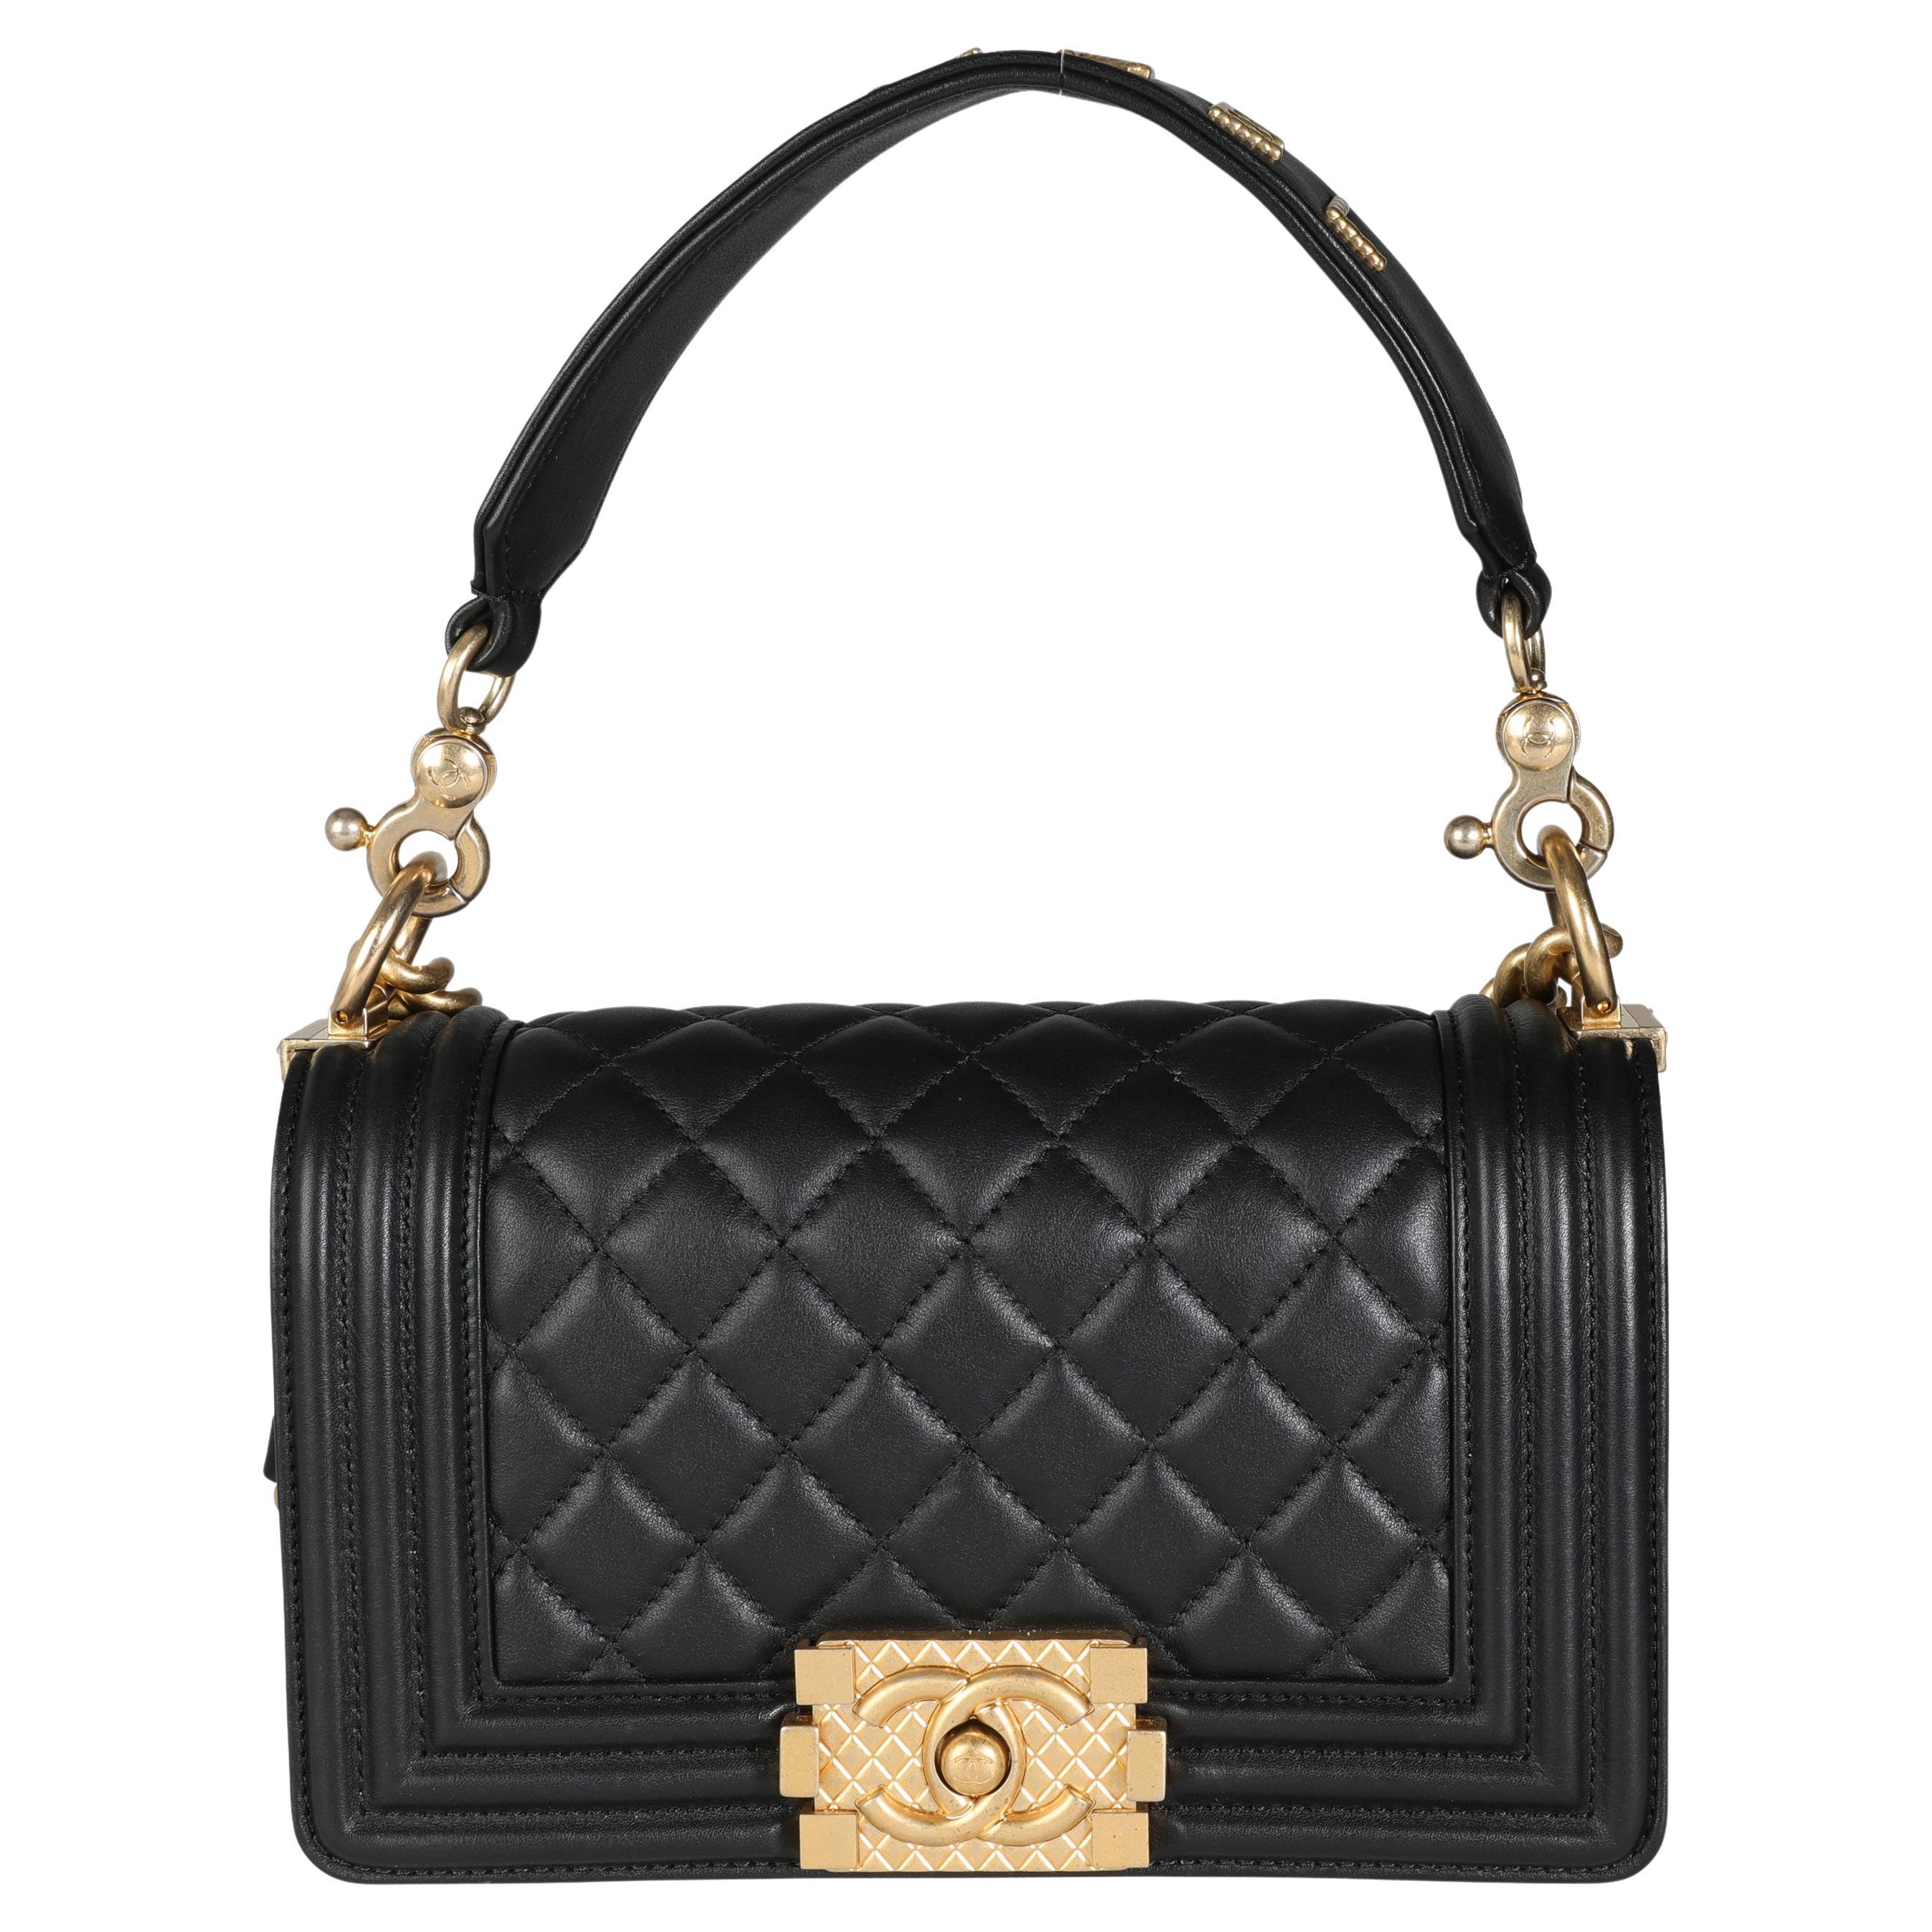 Chanel Black Lambskin Quilted Signature Handle Small Boy Bag